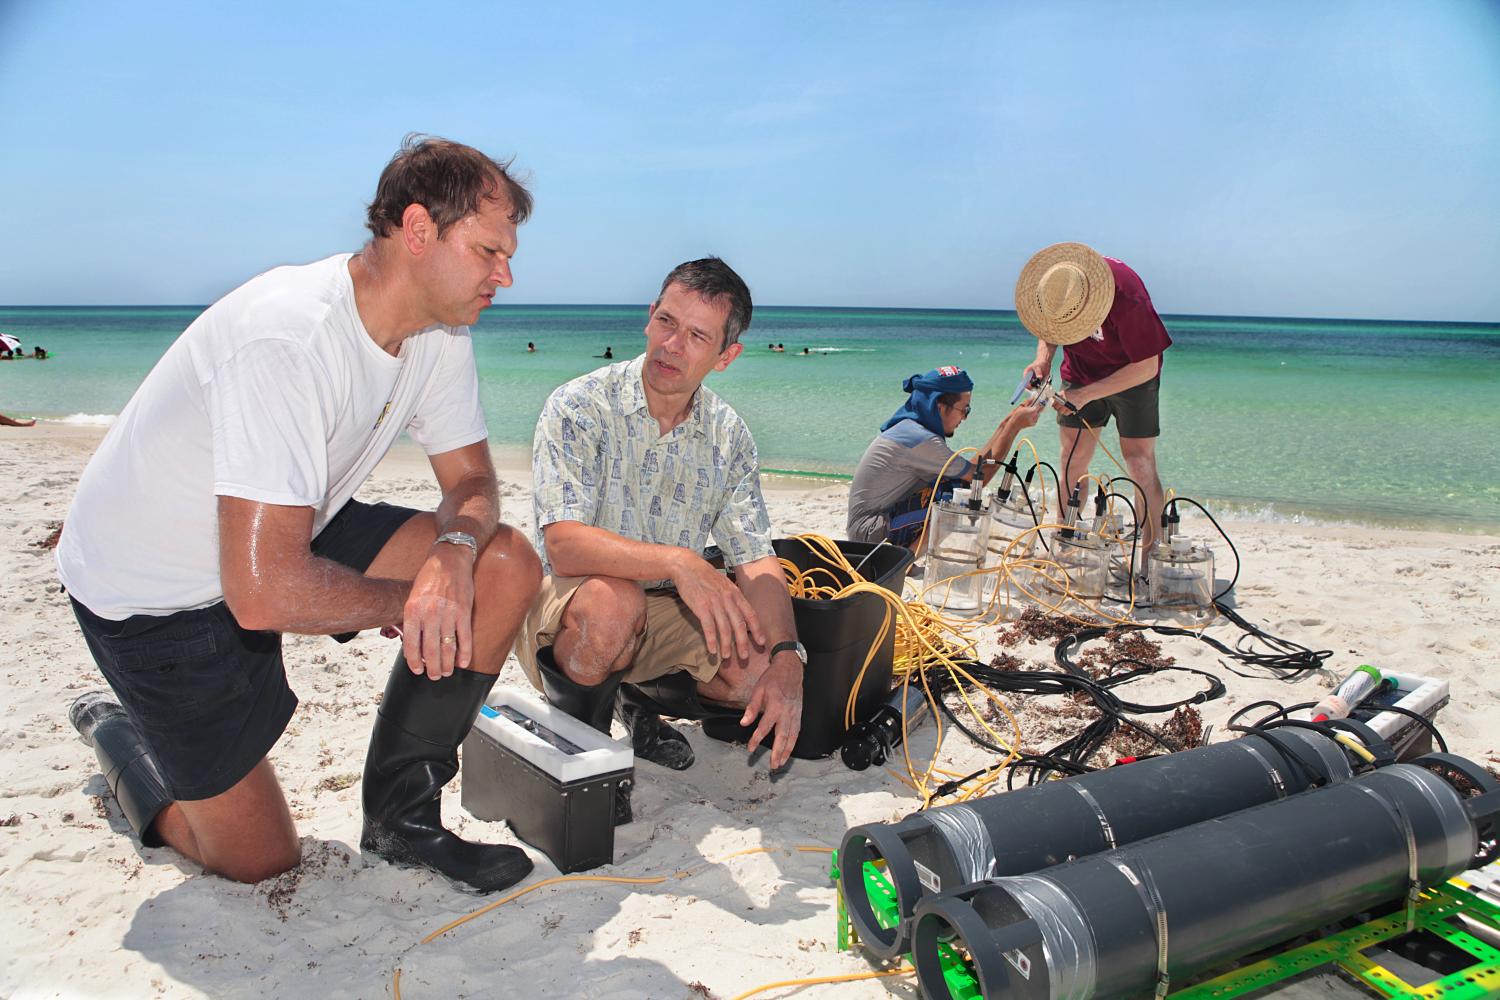 Four researchers assemble scientific instruments at the beach, sweating under the hot sun. The water is crystal clear.